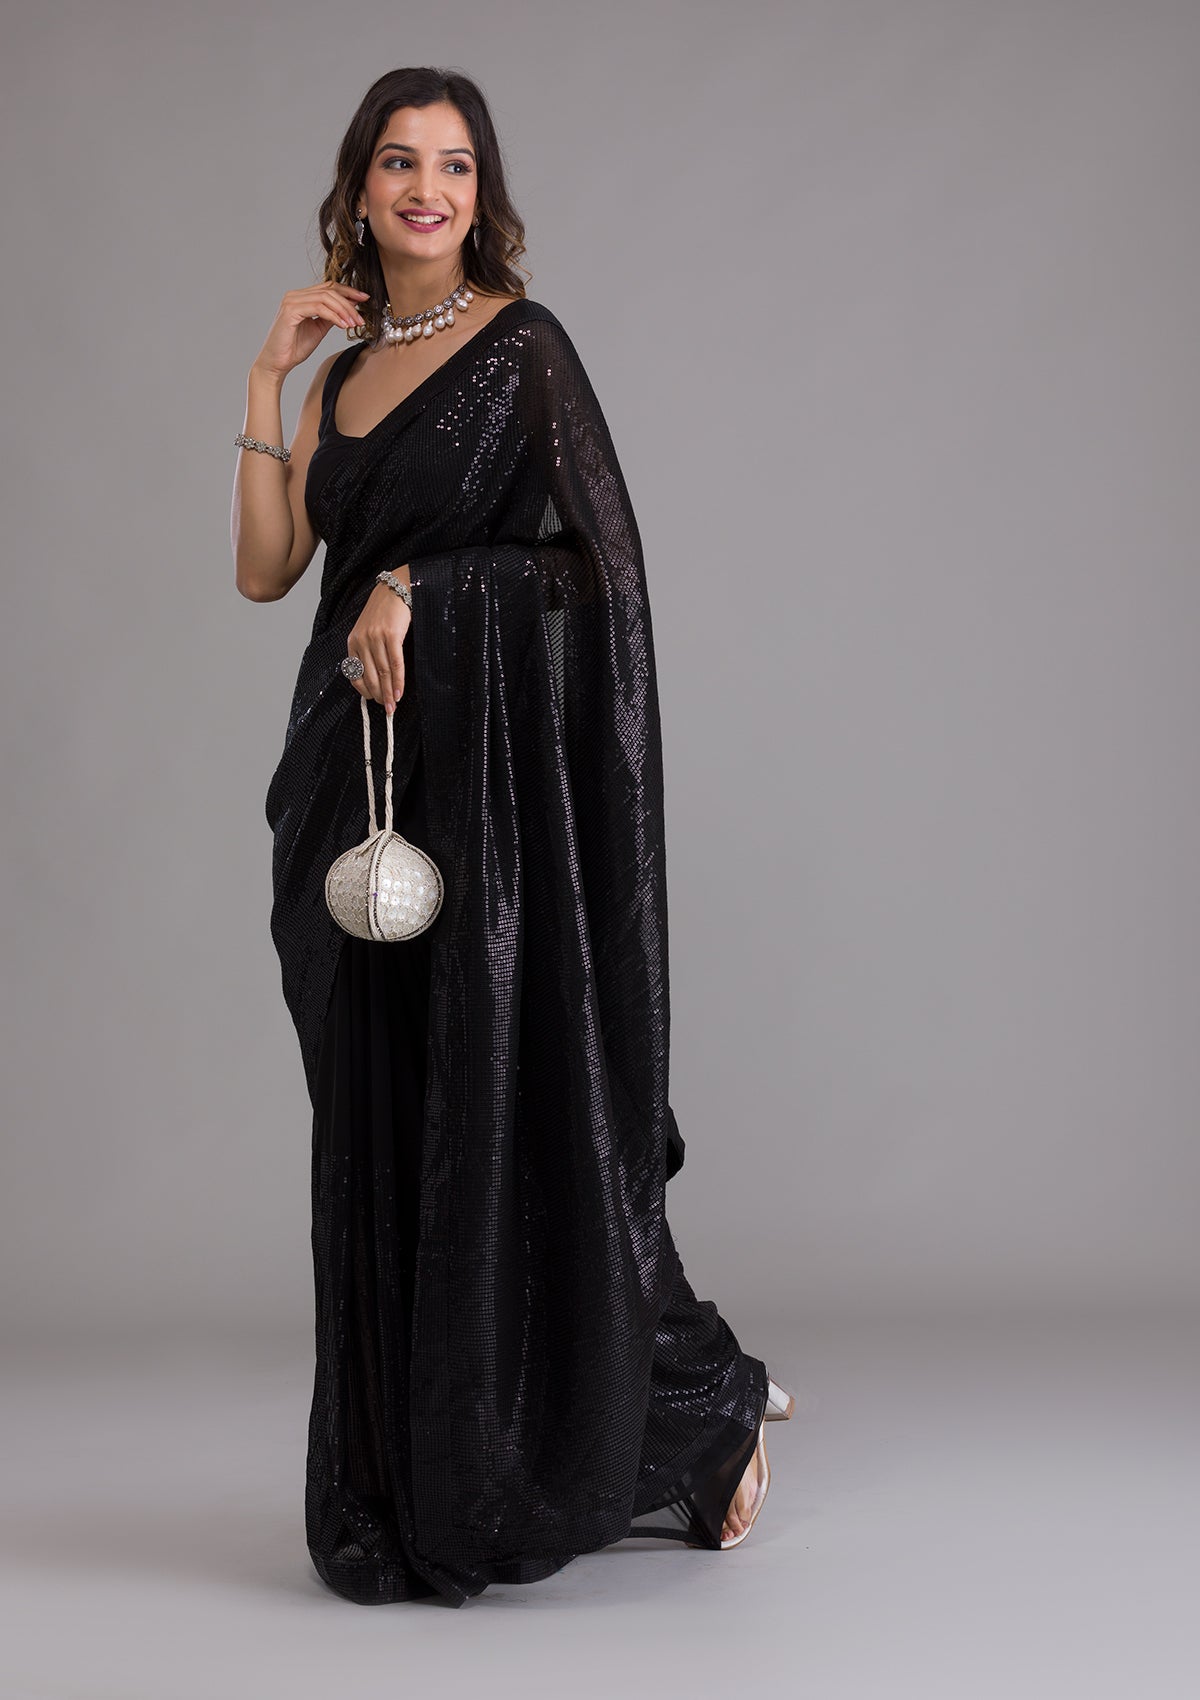 Black Saree For Farewell - Buy Black Saree For Farewell Online